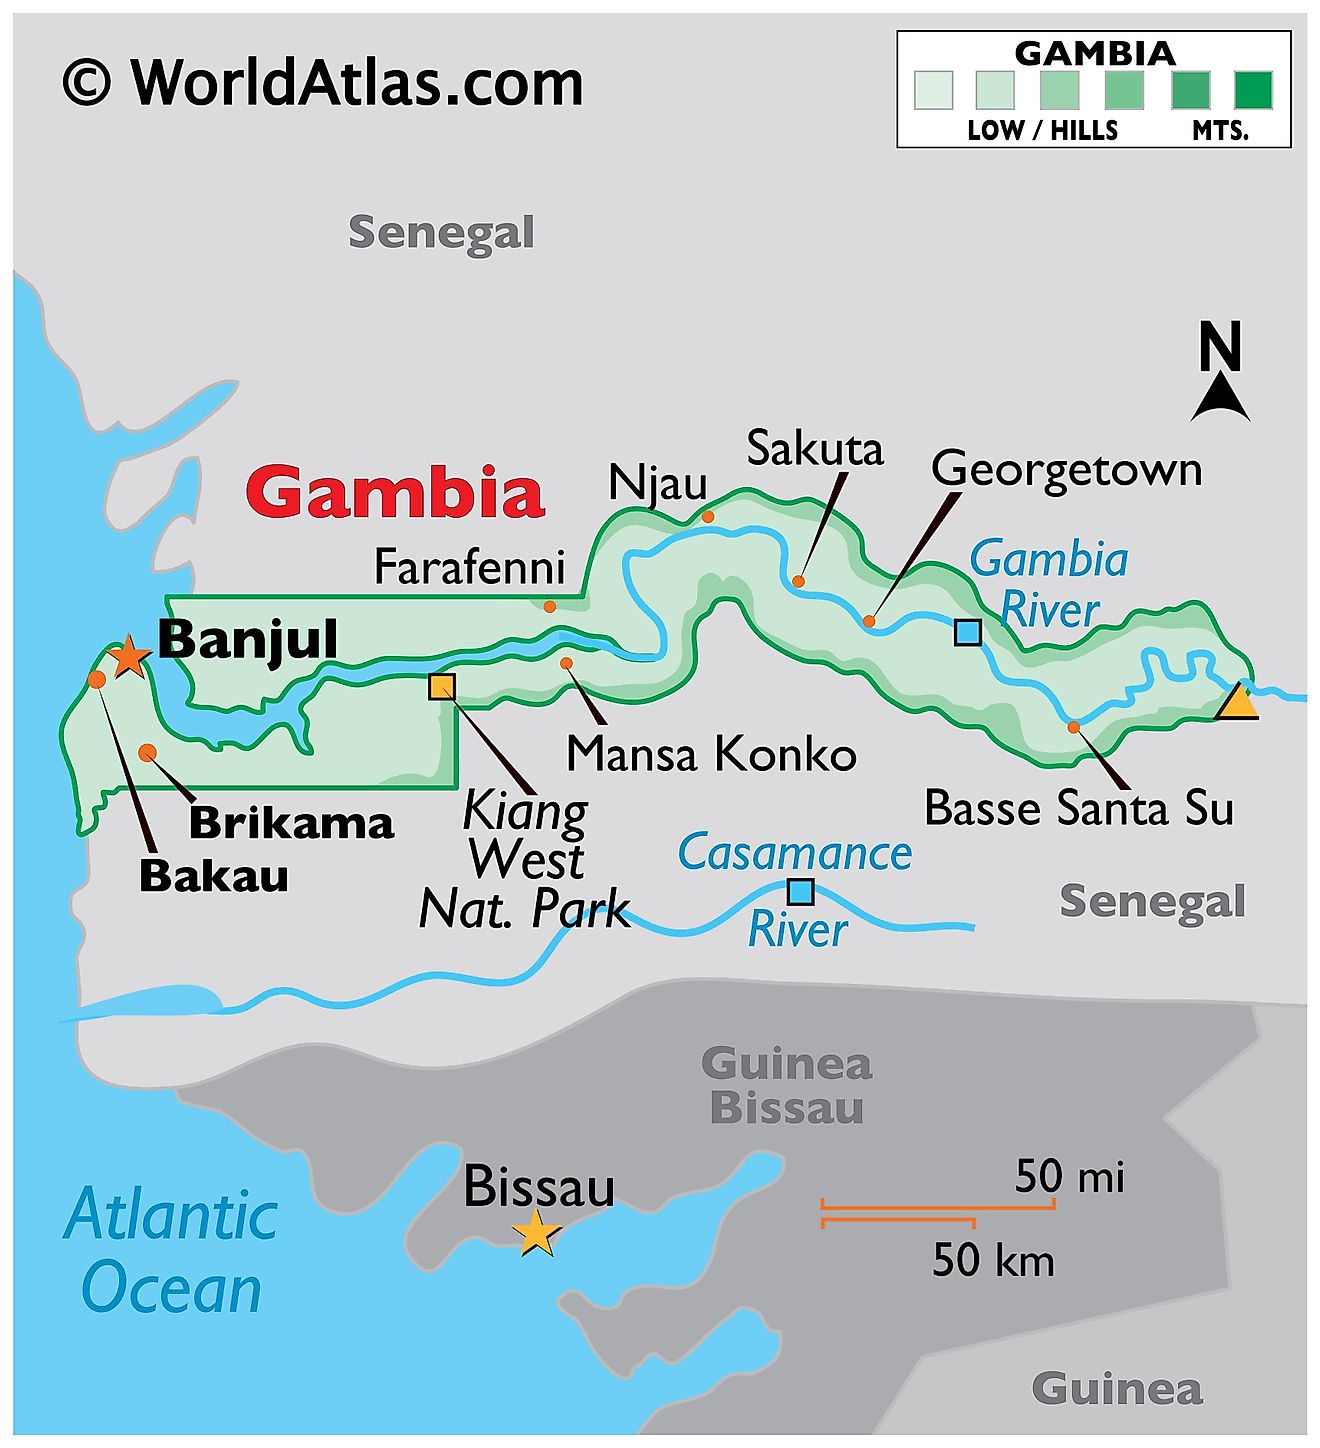 Physical Map of The Gambia showing the state boundaries, relief, The Gambia River, highest point, and important cities.